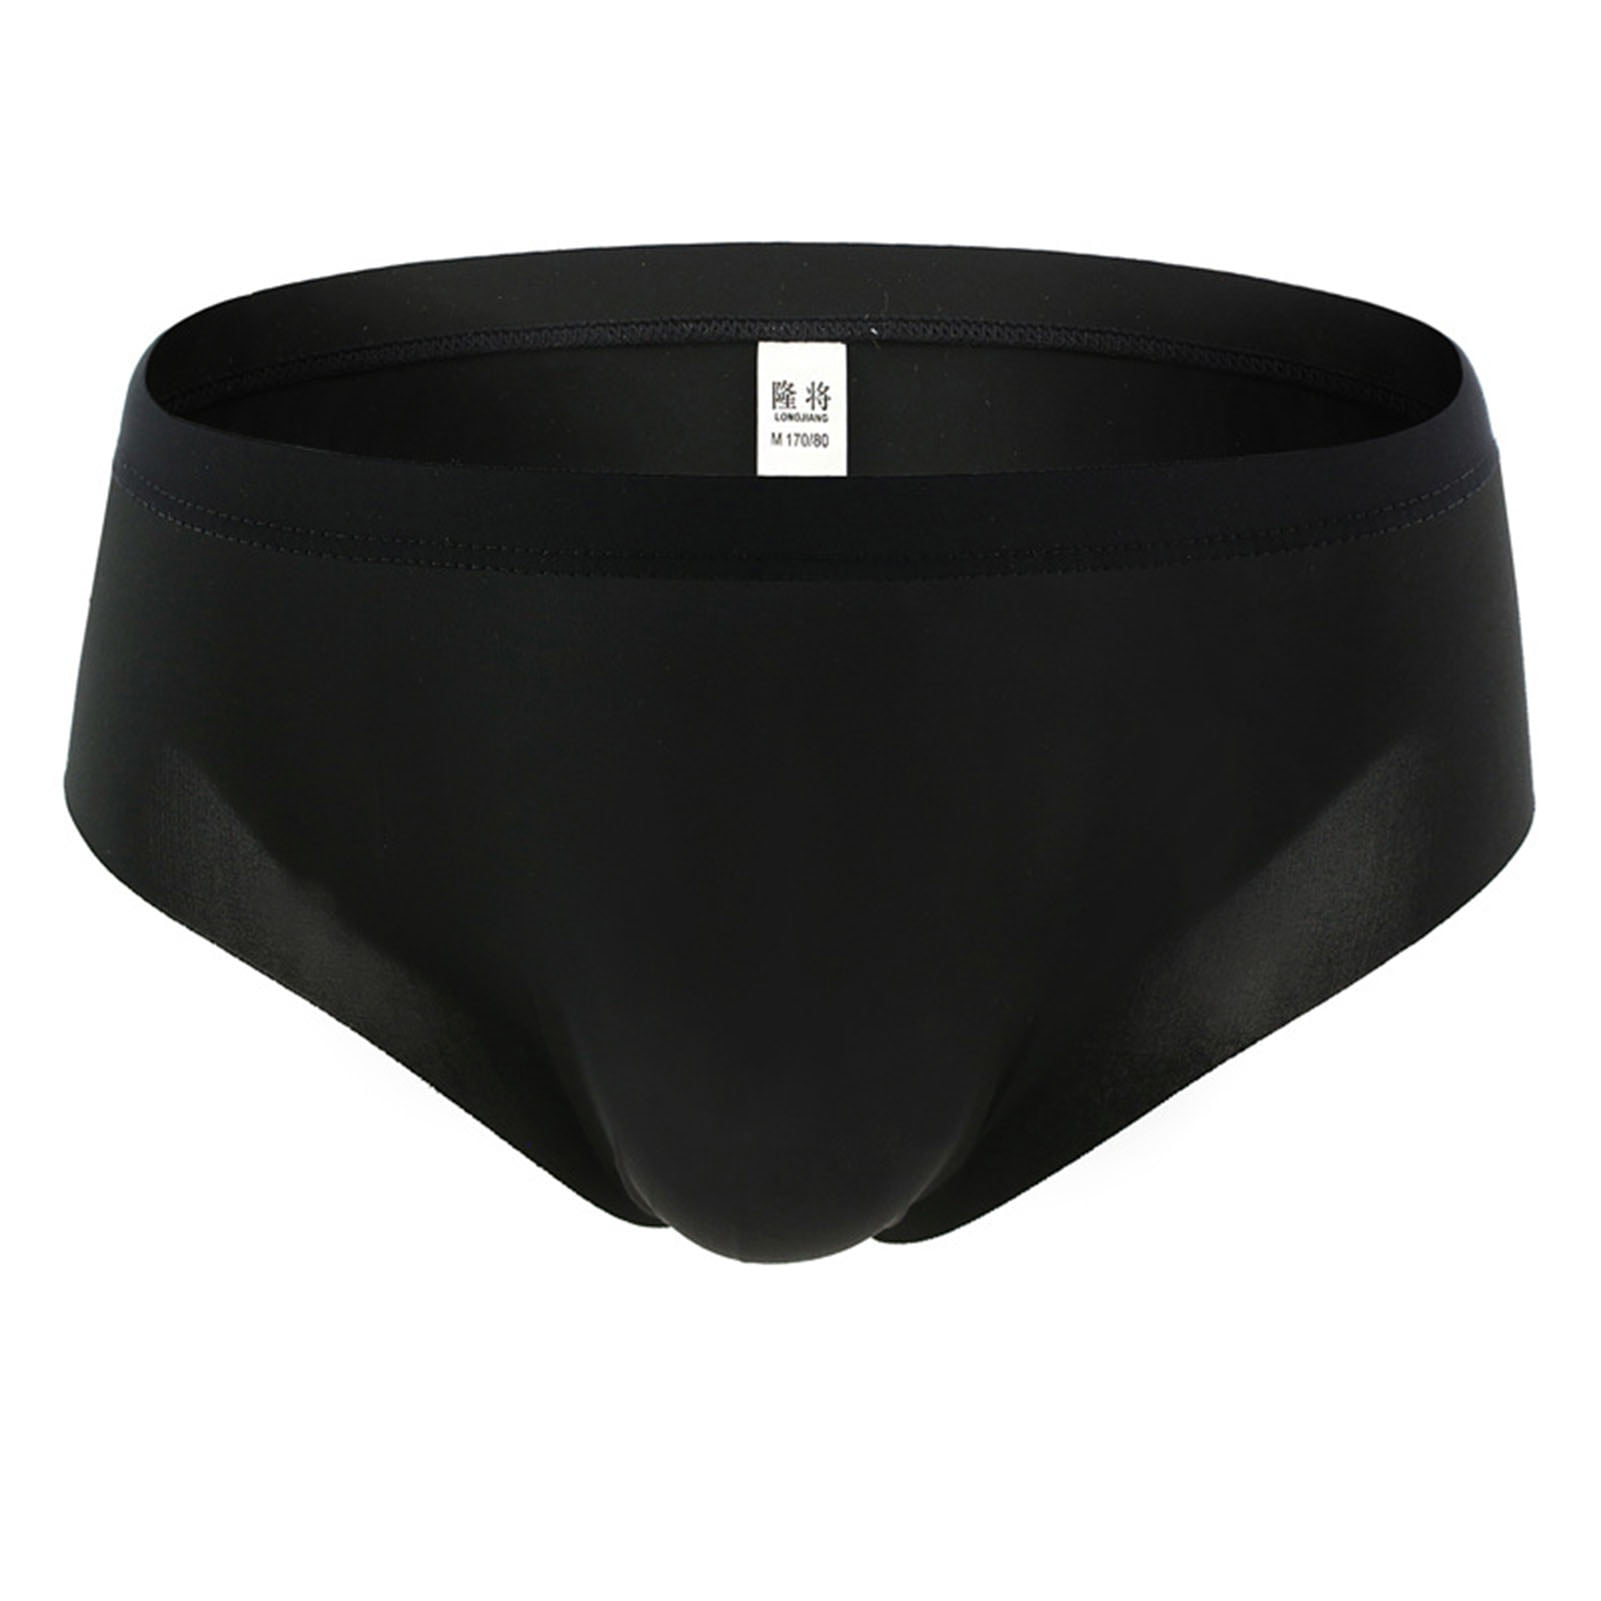 Mens Sexy Oily Boxer Underwear Seamless, Elastic, U Convex, Transparent  Sheer Boxer Briefs For Swimming And Trunks From Lonandon, $10.73